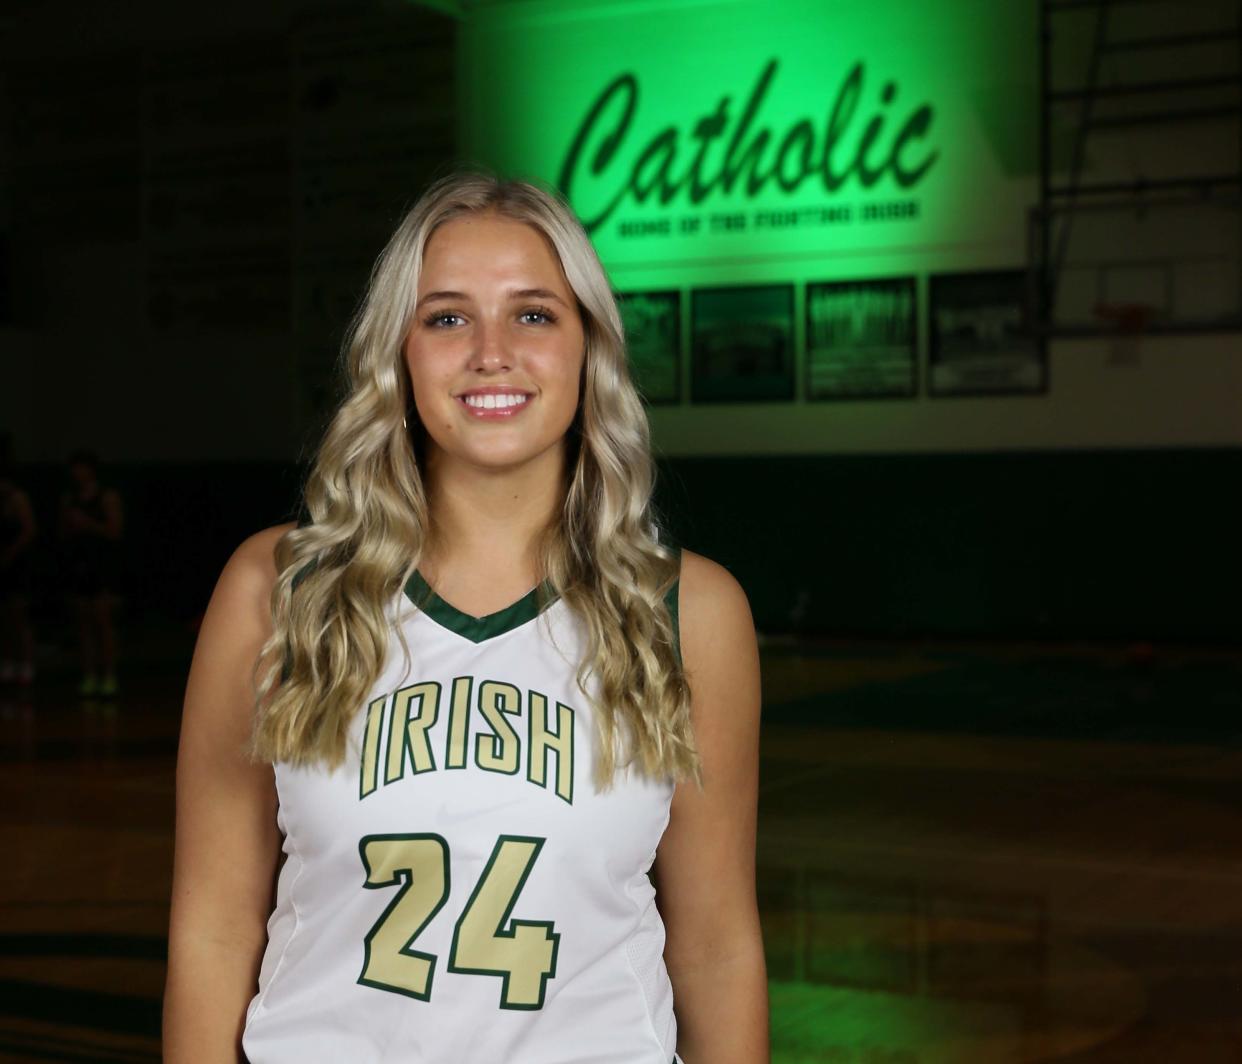 Knoxville Catholic High School junior Sydney Mains made Knox News' All-PrepXtra team for the 2022-23 season and went on to become the Most Valuable Player in the team's state championship win.